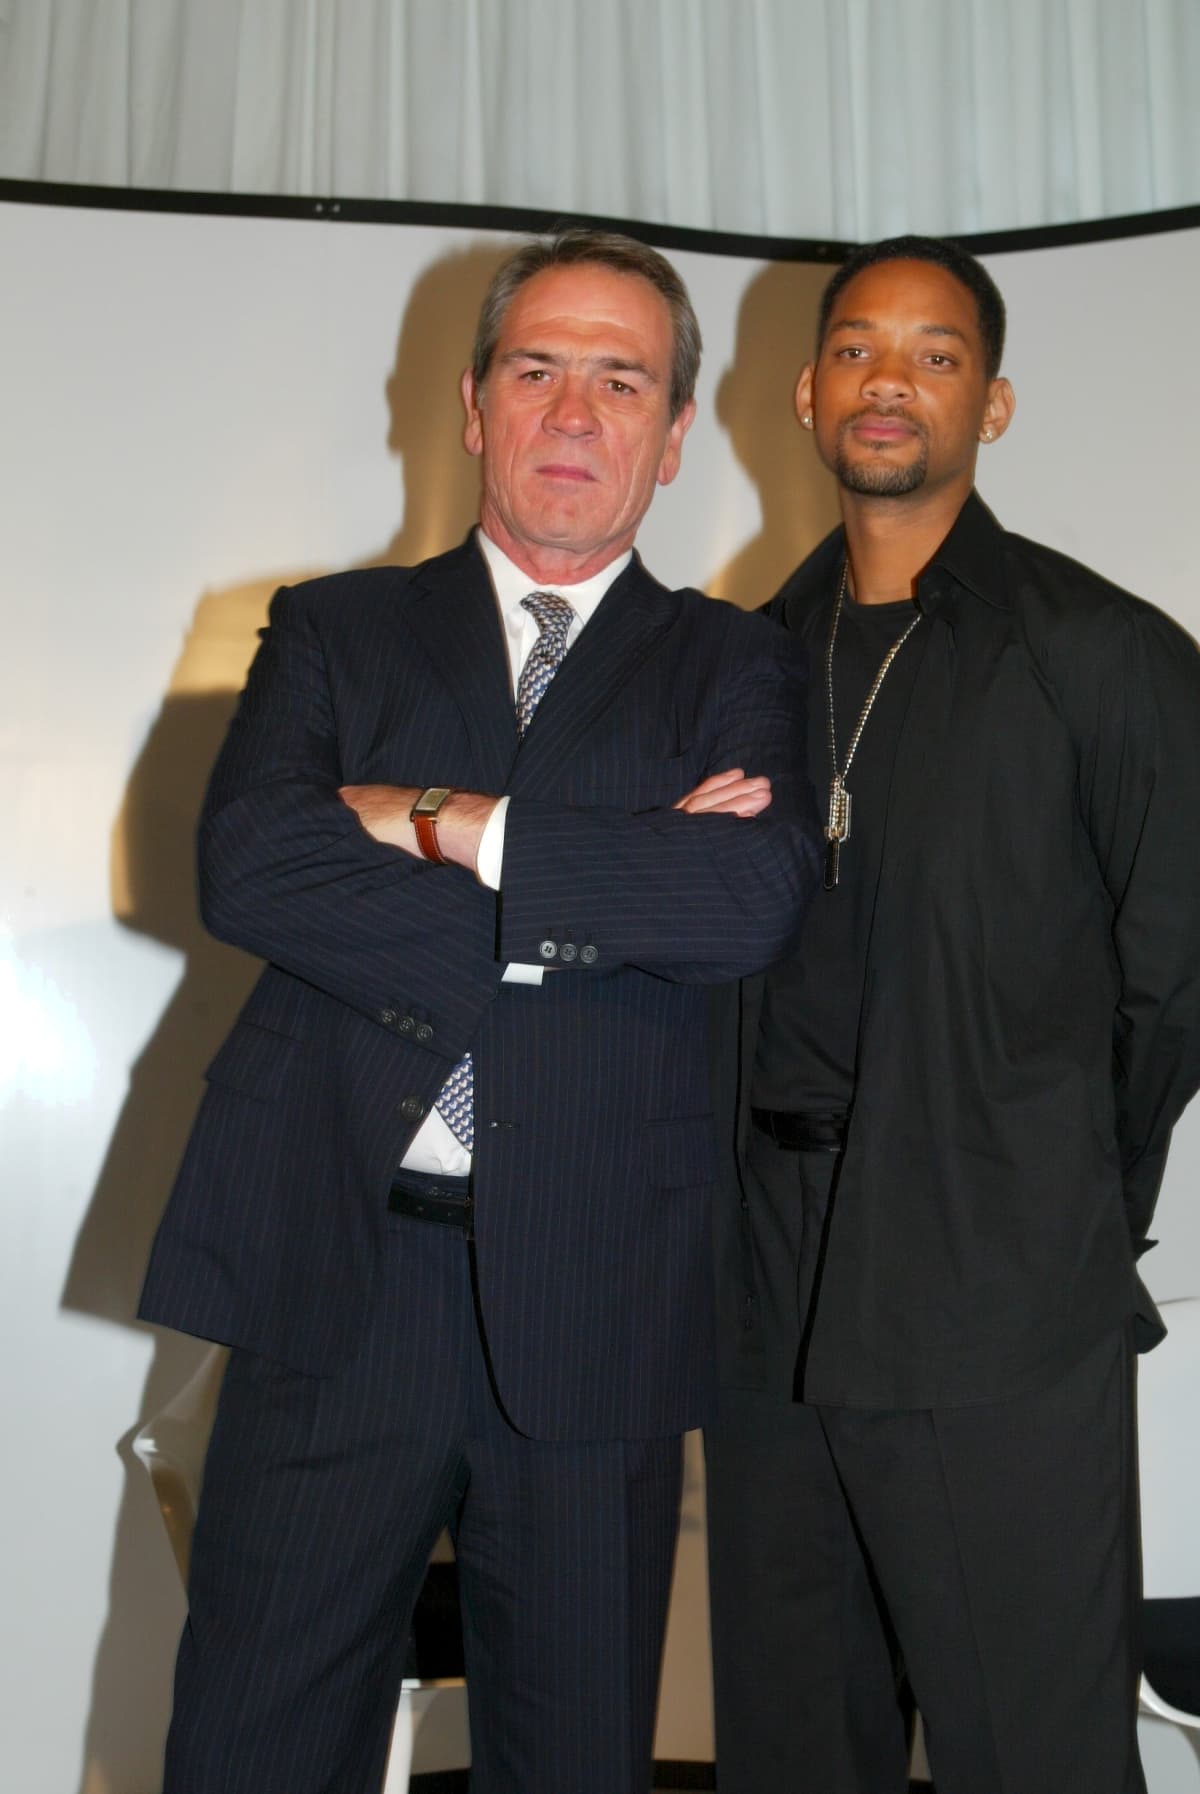 FRANCE - JULY 18:  Tommy Lee Jones and Will Smith in Paris, France on July 18, 2002.  (Photo by Alain BENAINOUS/Gamma-Rapho via Getty Images)